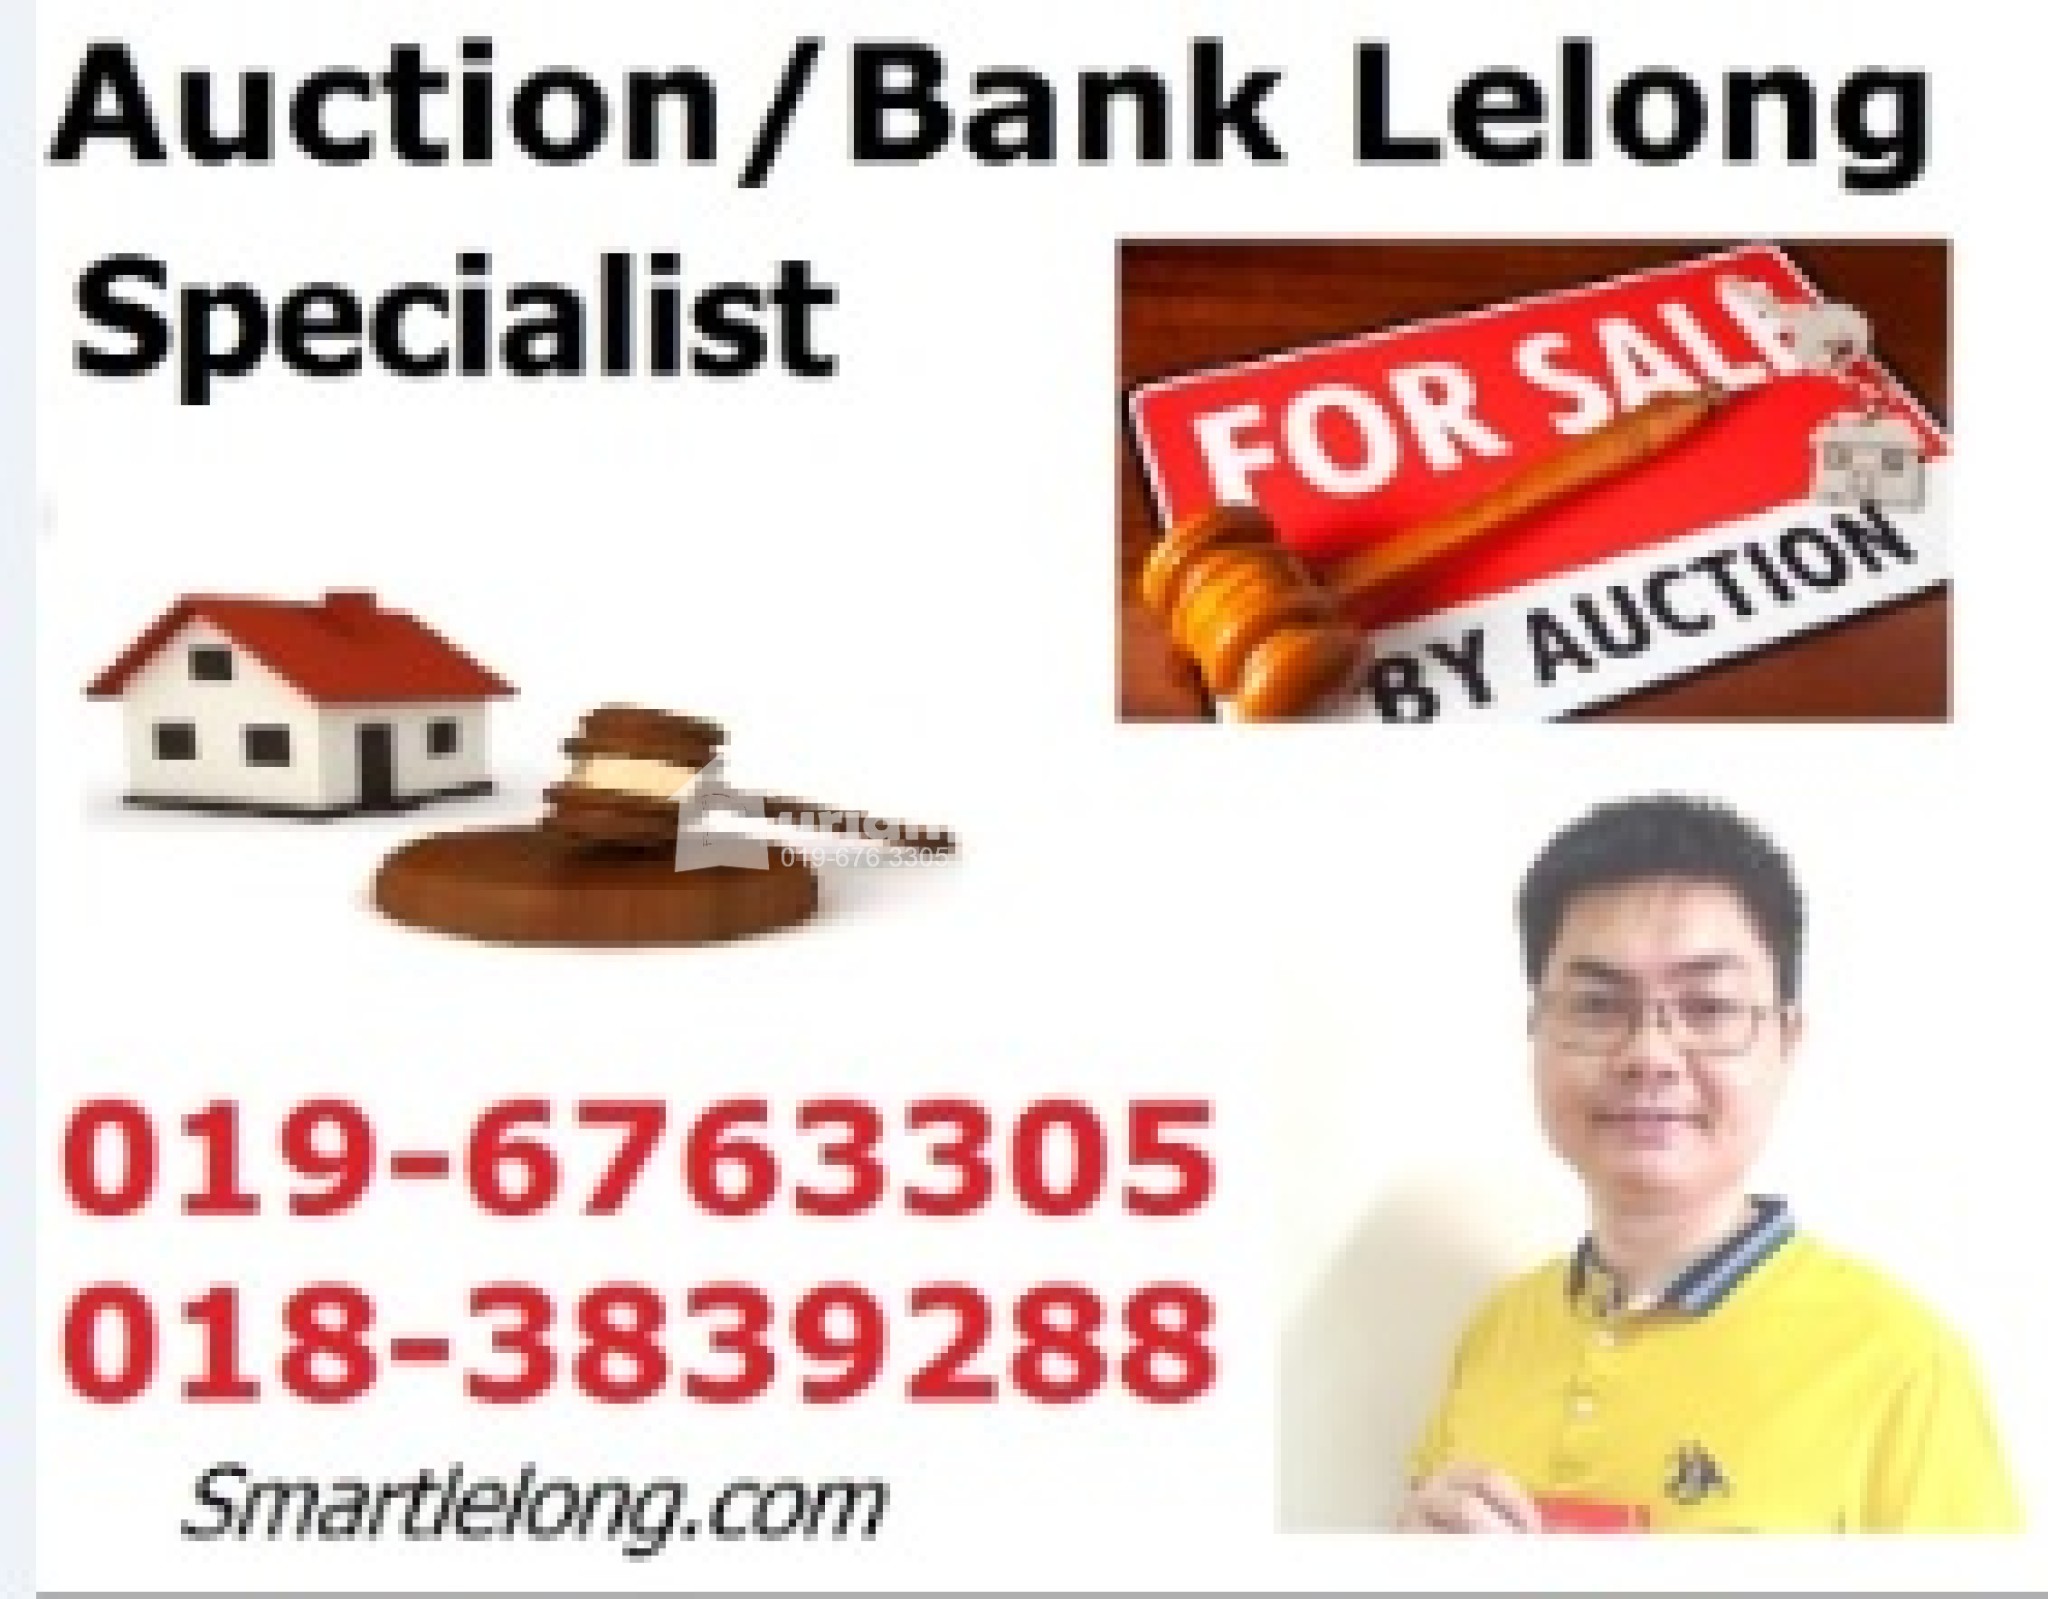 Terrace House For Auction at Taman Intan